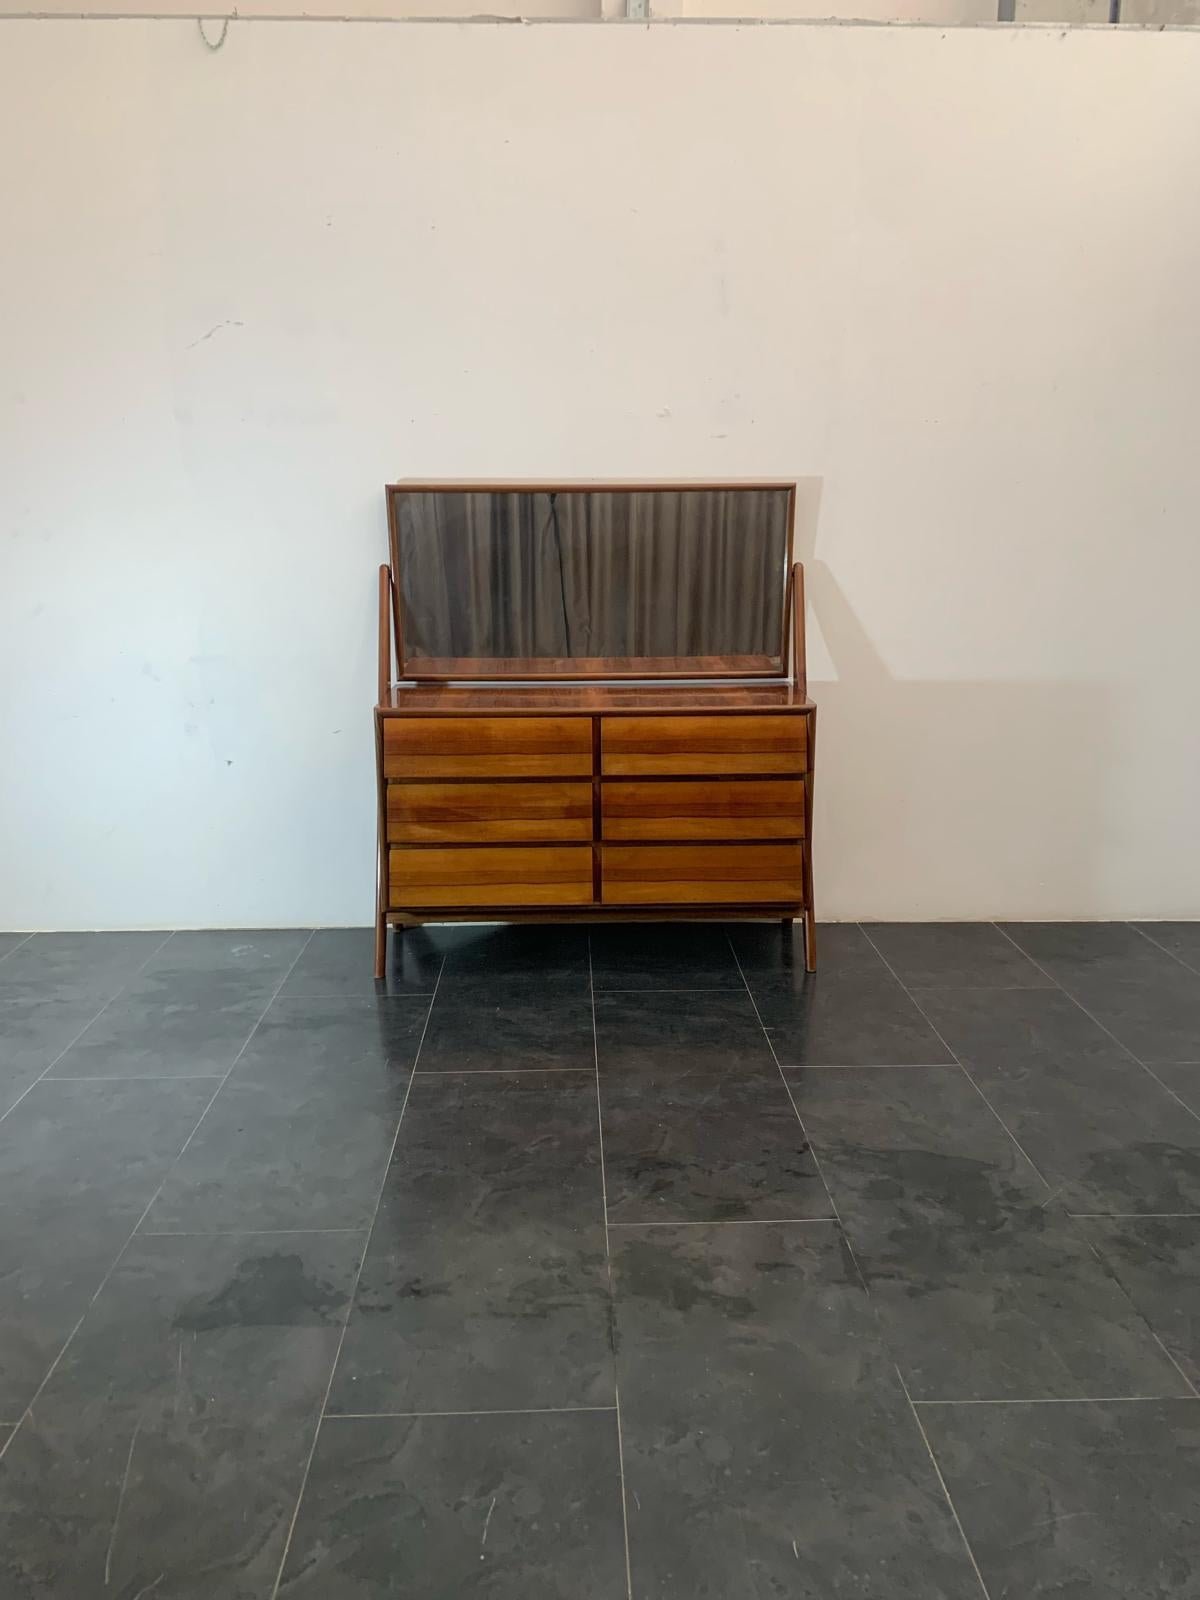 1960s chest of drawers with mirror of exceptional design. The excellently built structure with generous thicknesses guarantees functionality and solidity. The central body features a selection of rosewood on the front of the drawers placed